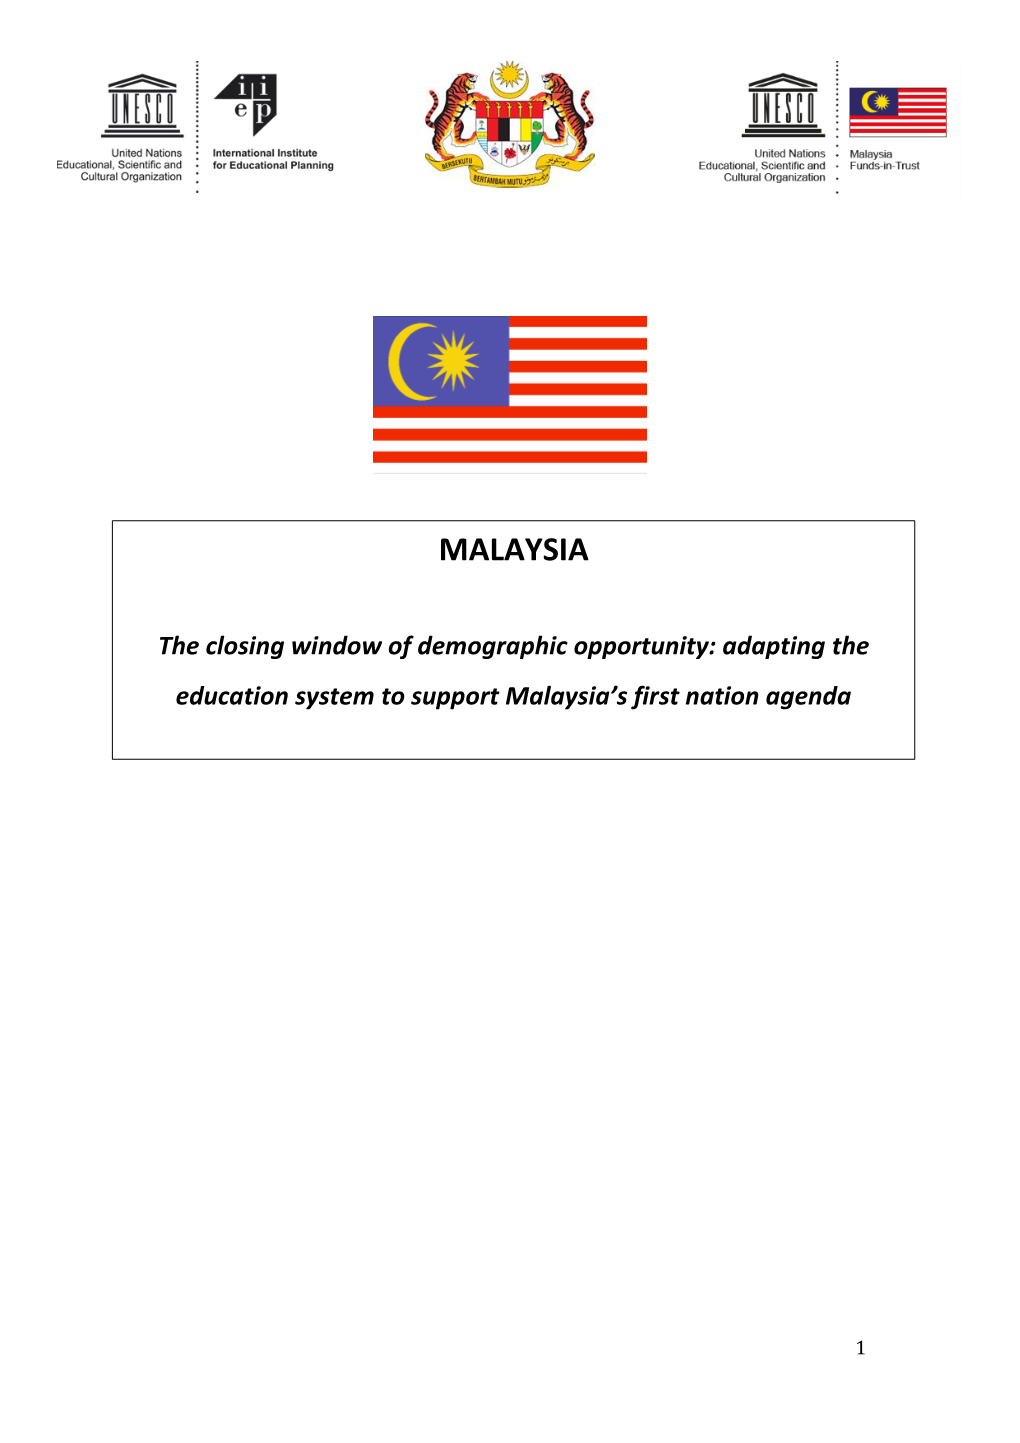 Adapting the Education System to Support Malaysia's First Nation Agenda